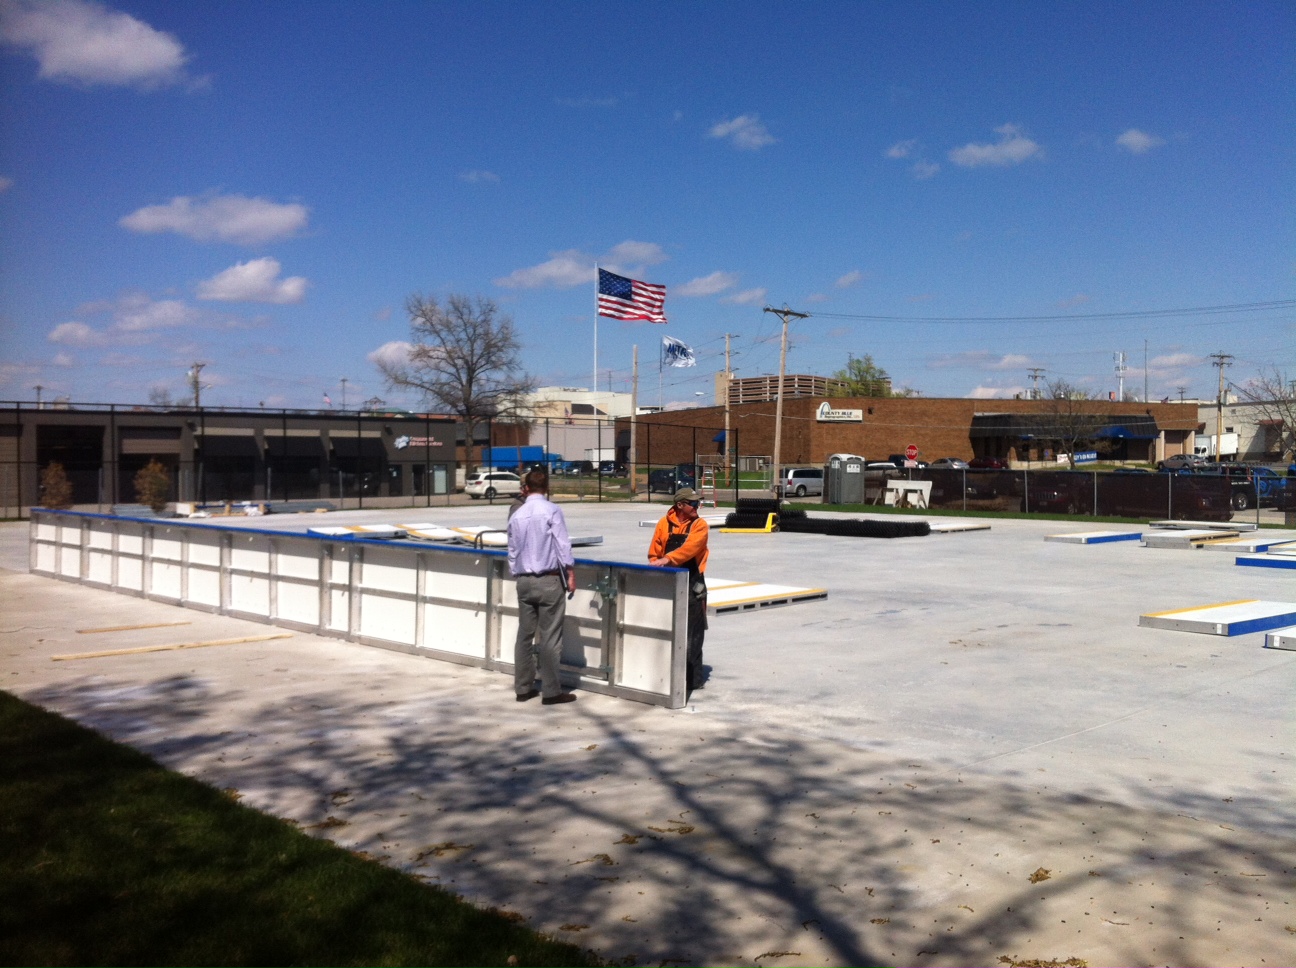 Brentwood inline rink in last phase